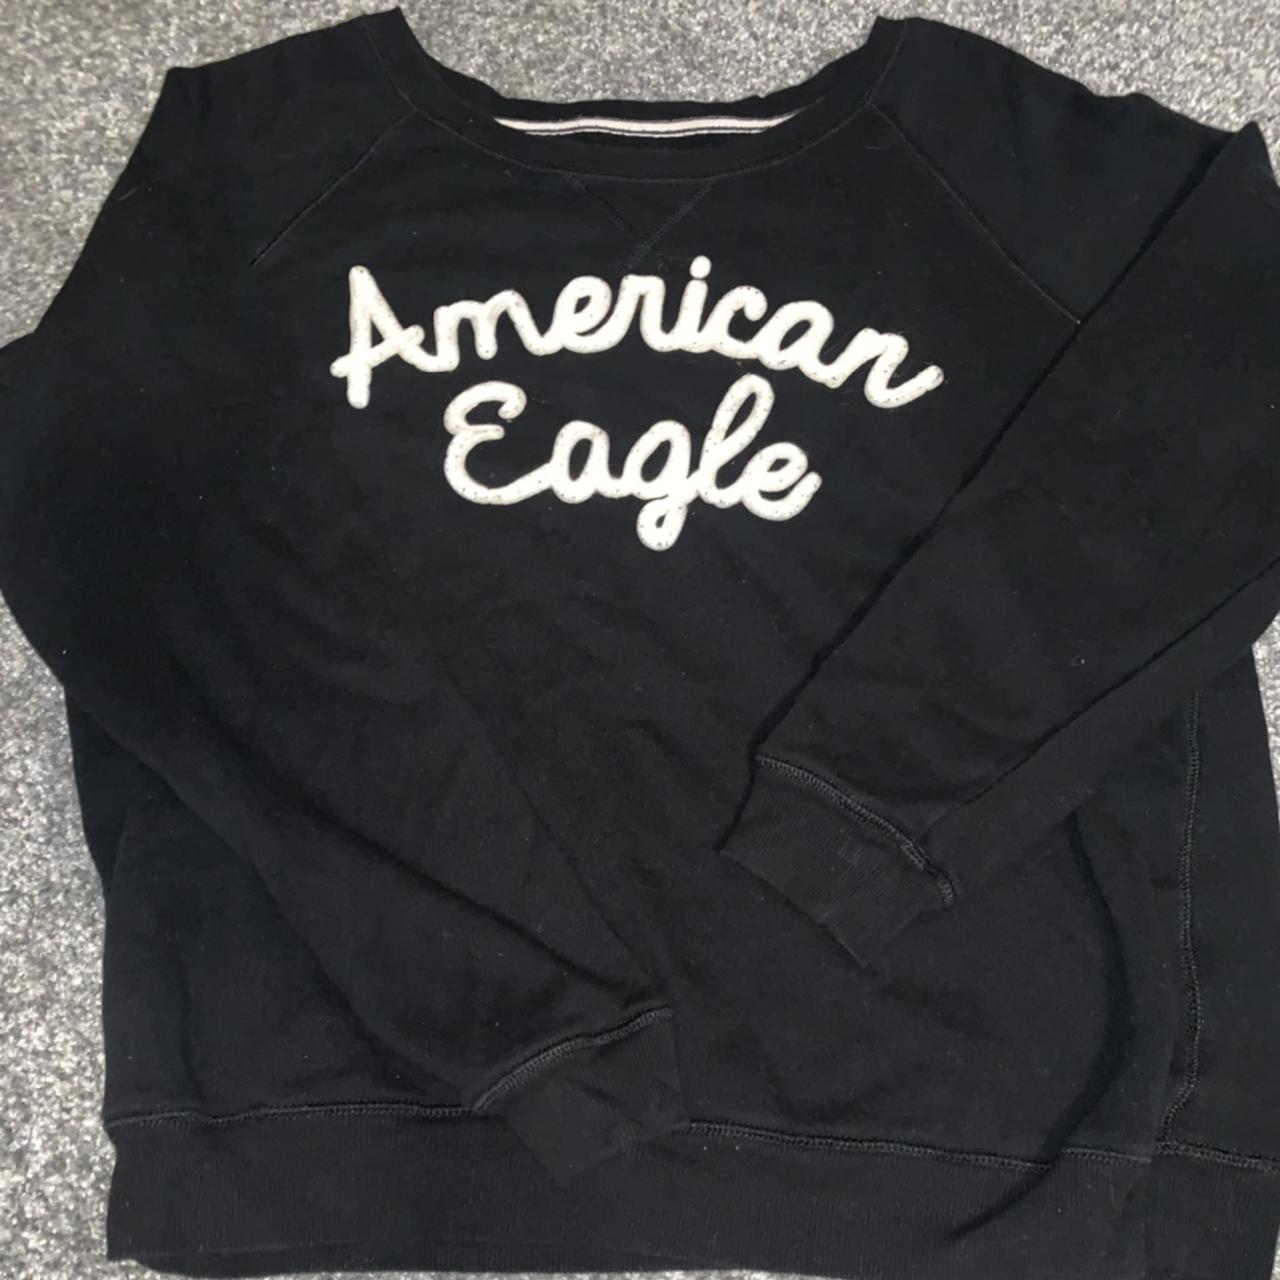 American Eagle Outfitters Women's Black and White Sweatshirt | Depop